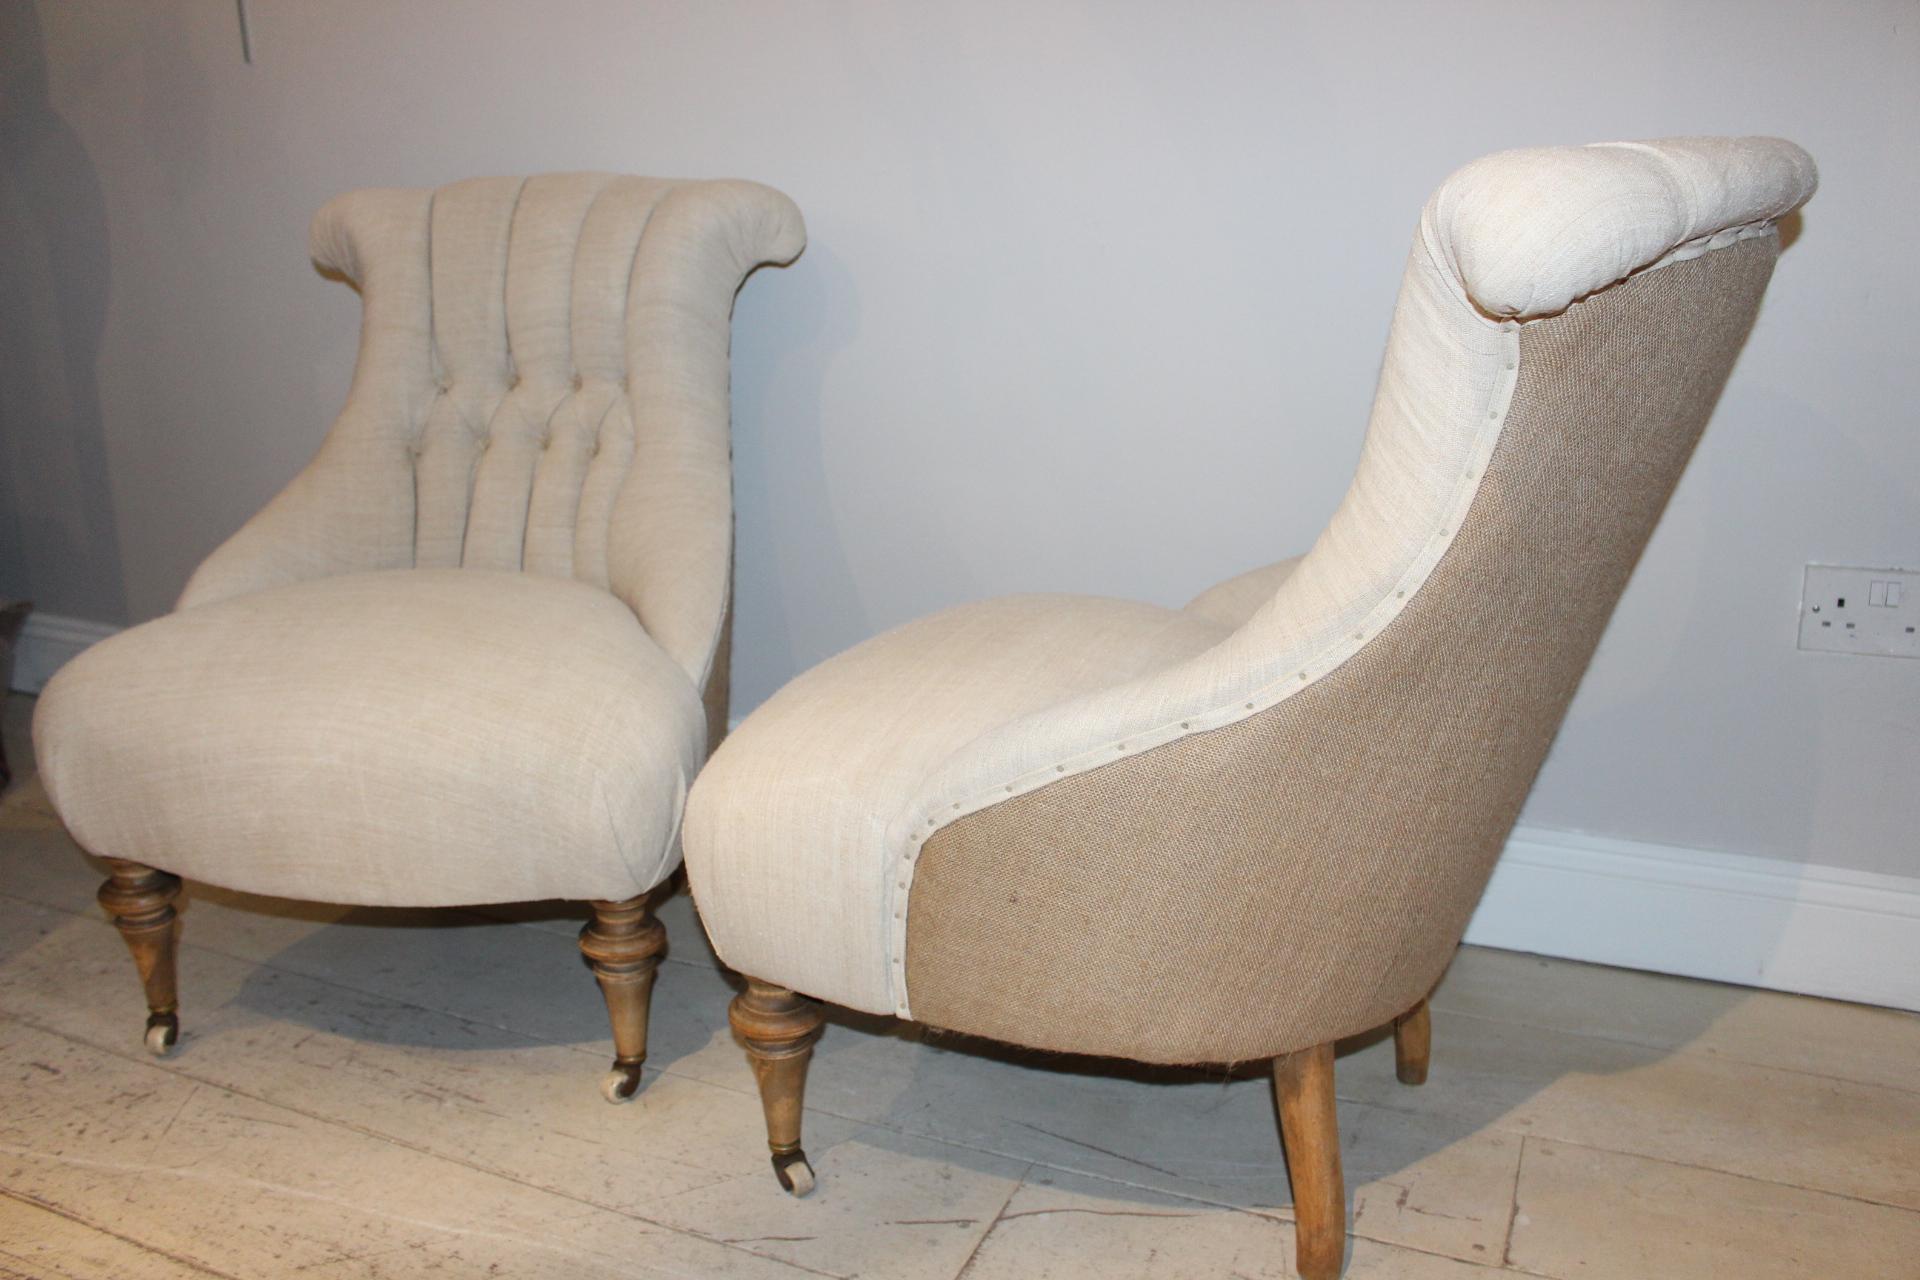 Victorian Pair of Late circa 19th Century Upholstered Swedish Button Back Salon Chairs